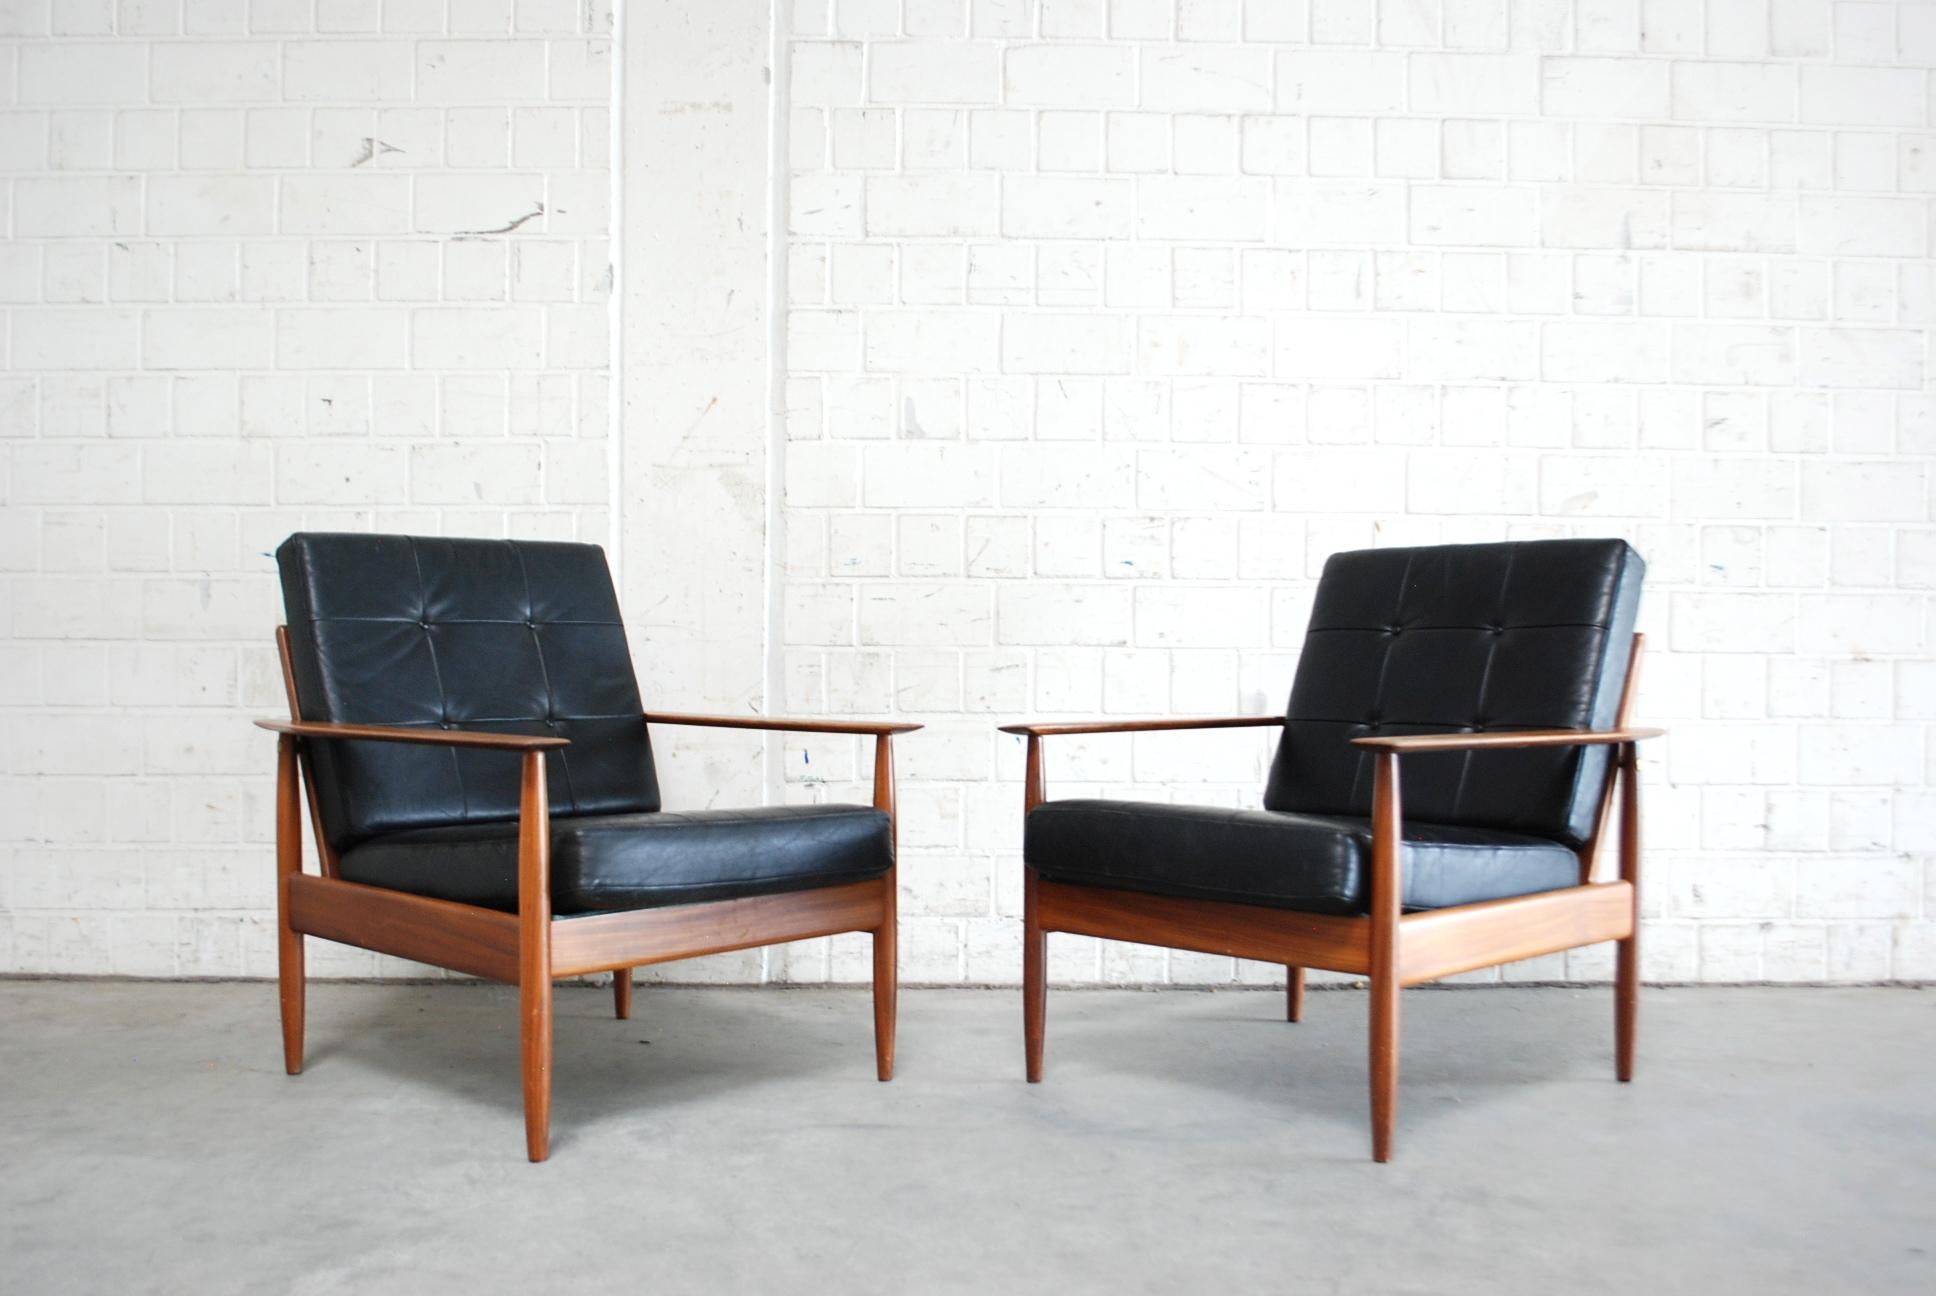 Danish pair of leather armchairs from 1960s.
Black aniline leather and teakwood with nice brass details.